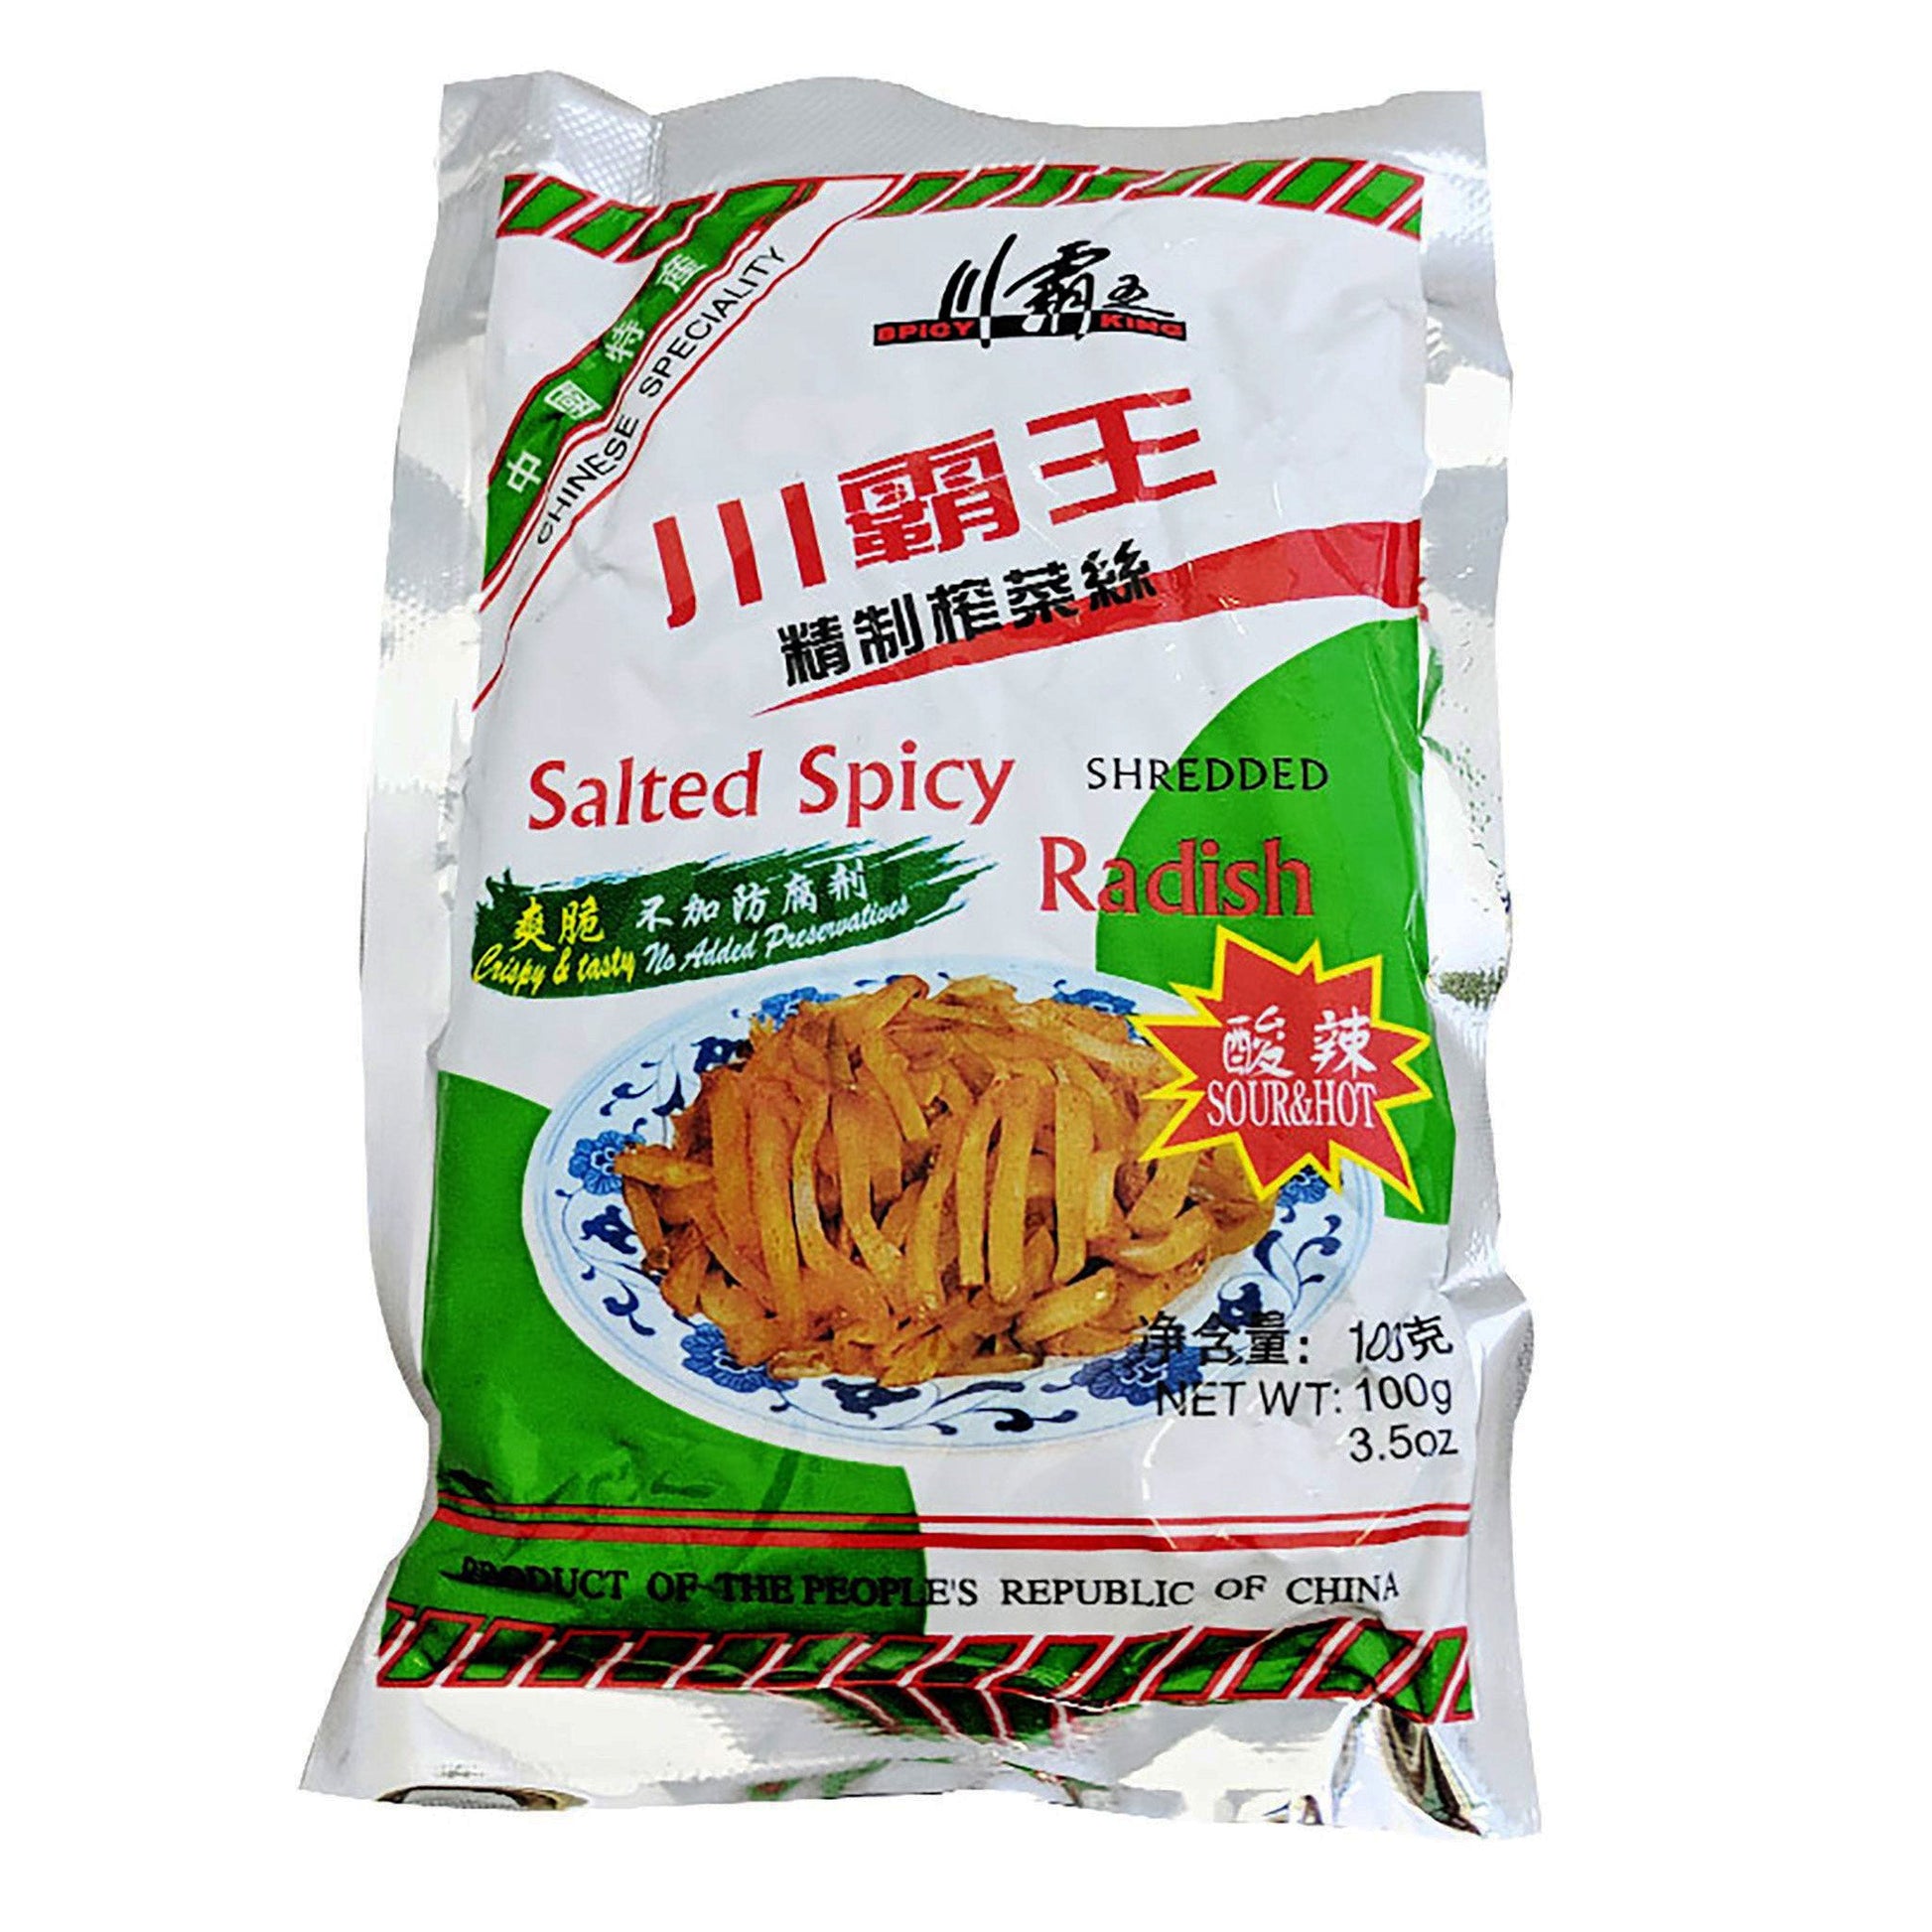 Front graphic image of Spicy King Salted Spicy Shredded Radish - Sour & Hot Flavor 3.5oz